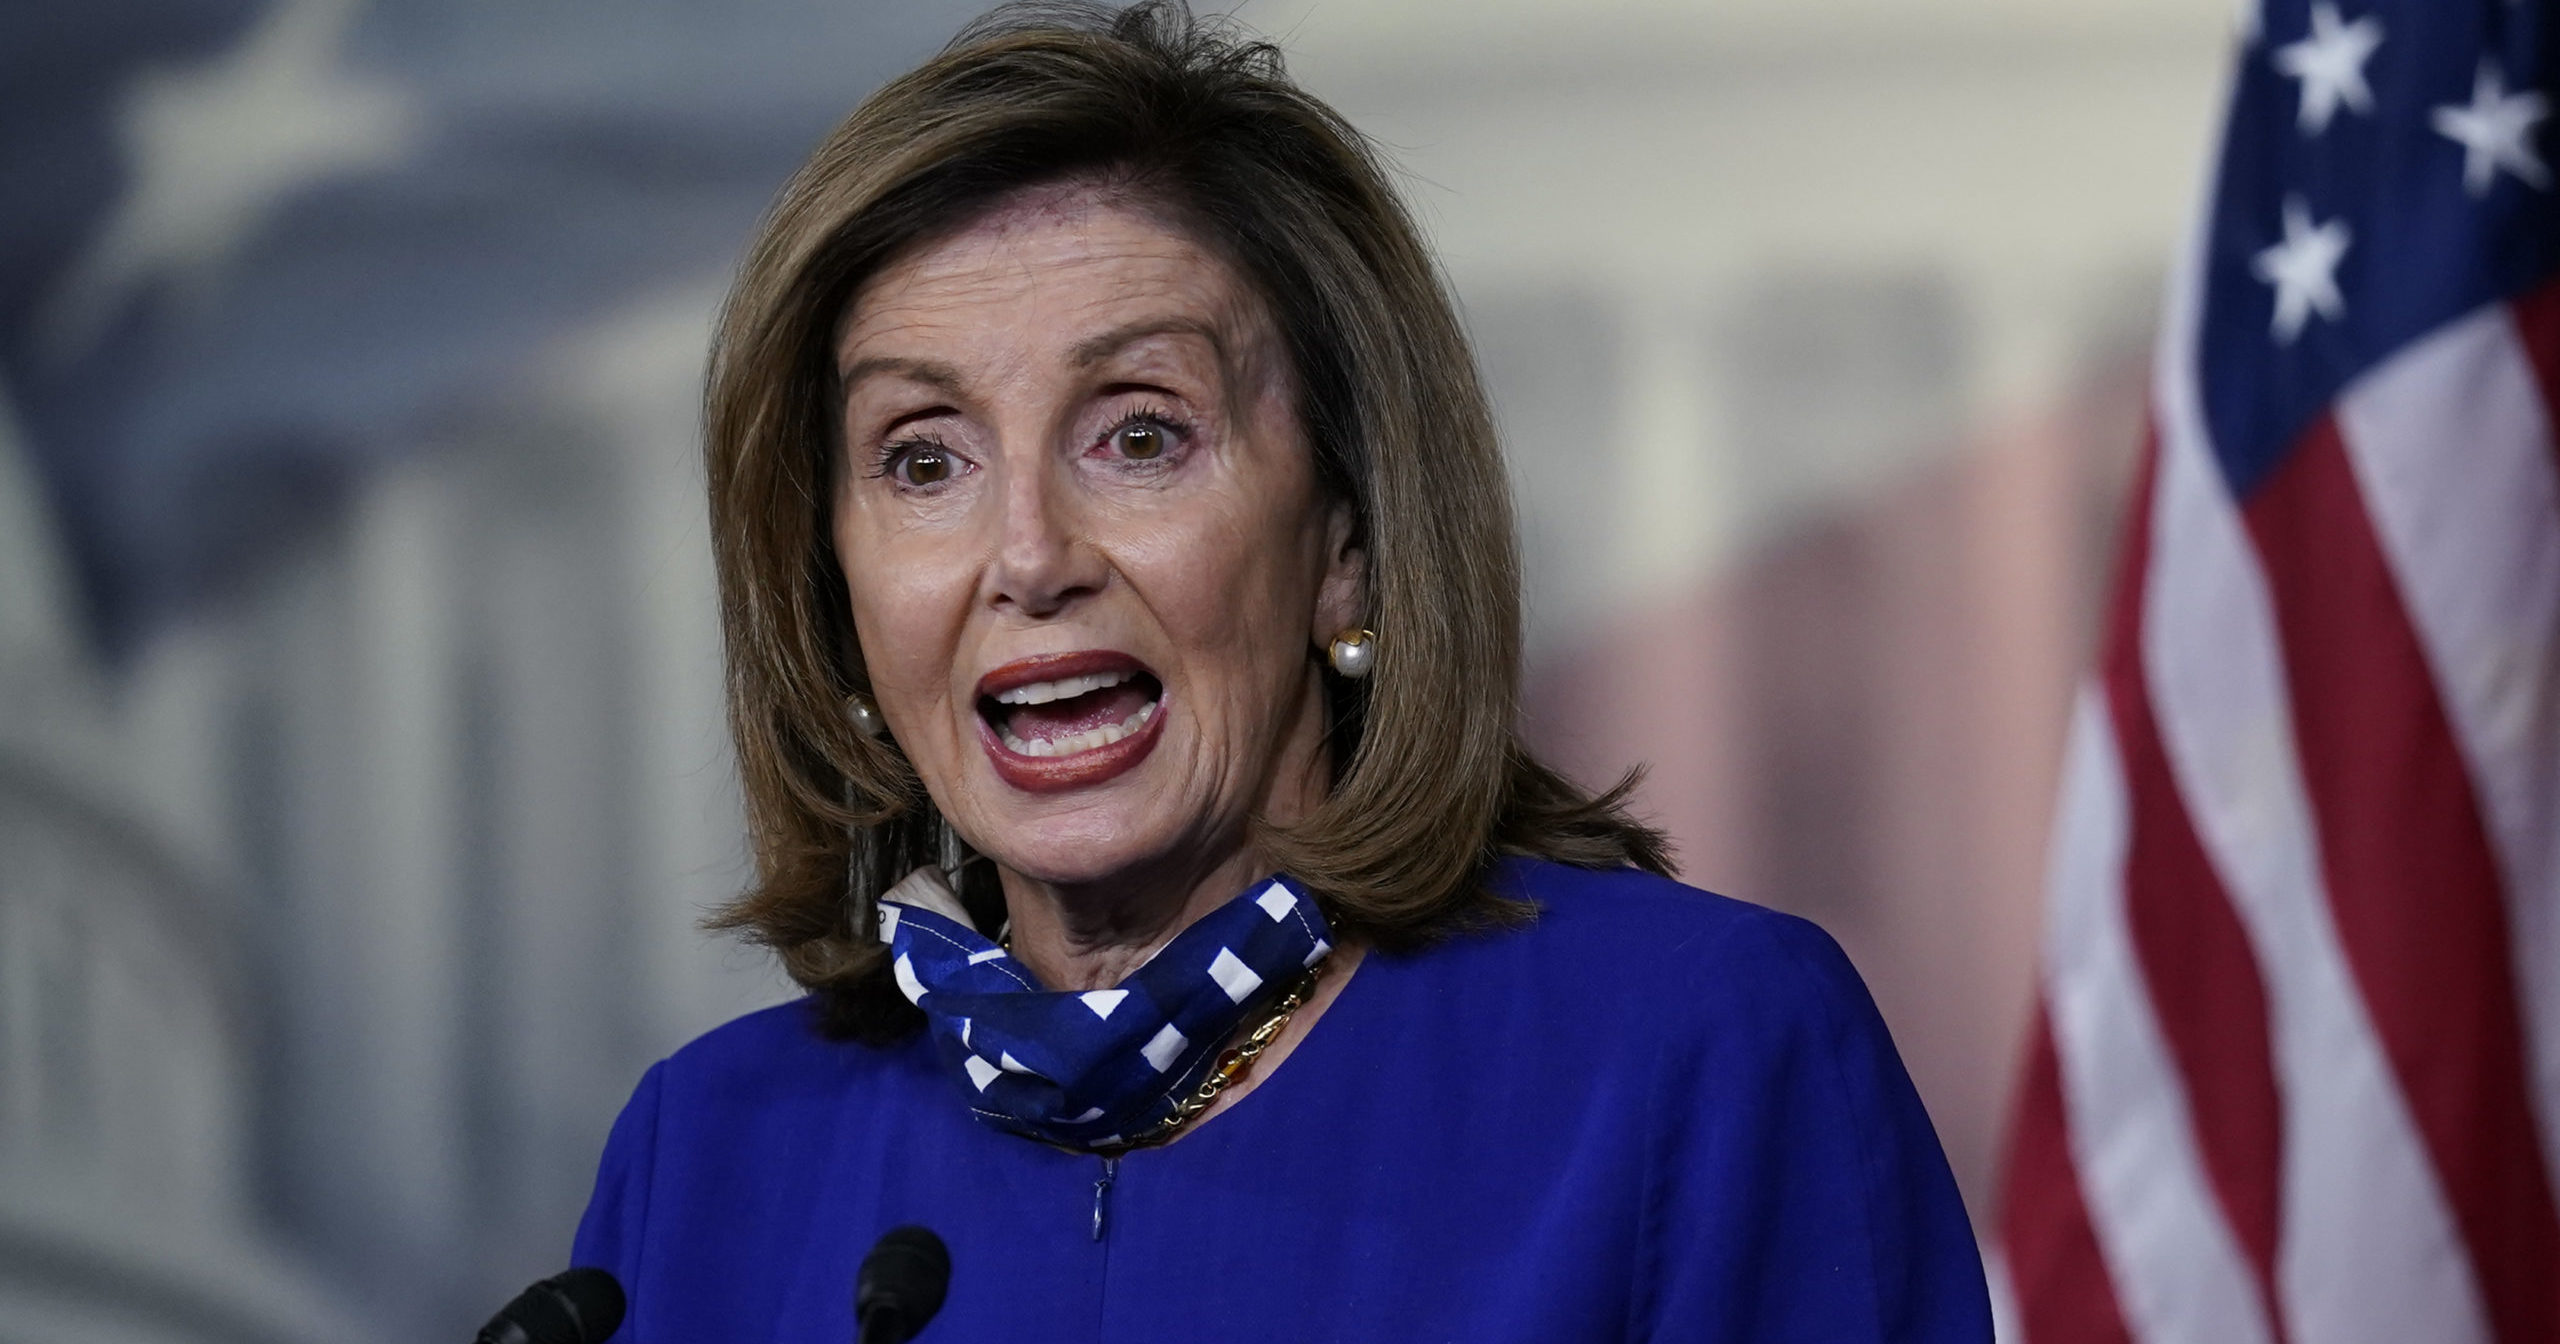 Speaker of the House Nancy Pelosi speaks during a news conference at the Capitol in Washington, D.C., on Aug. 27, 2020.